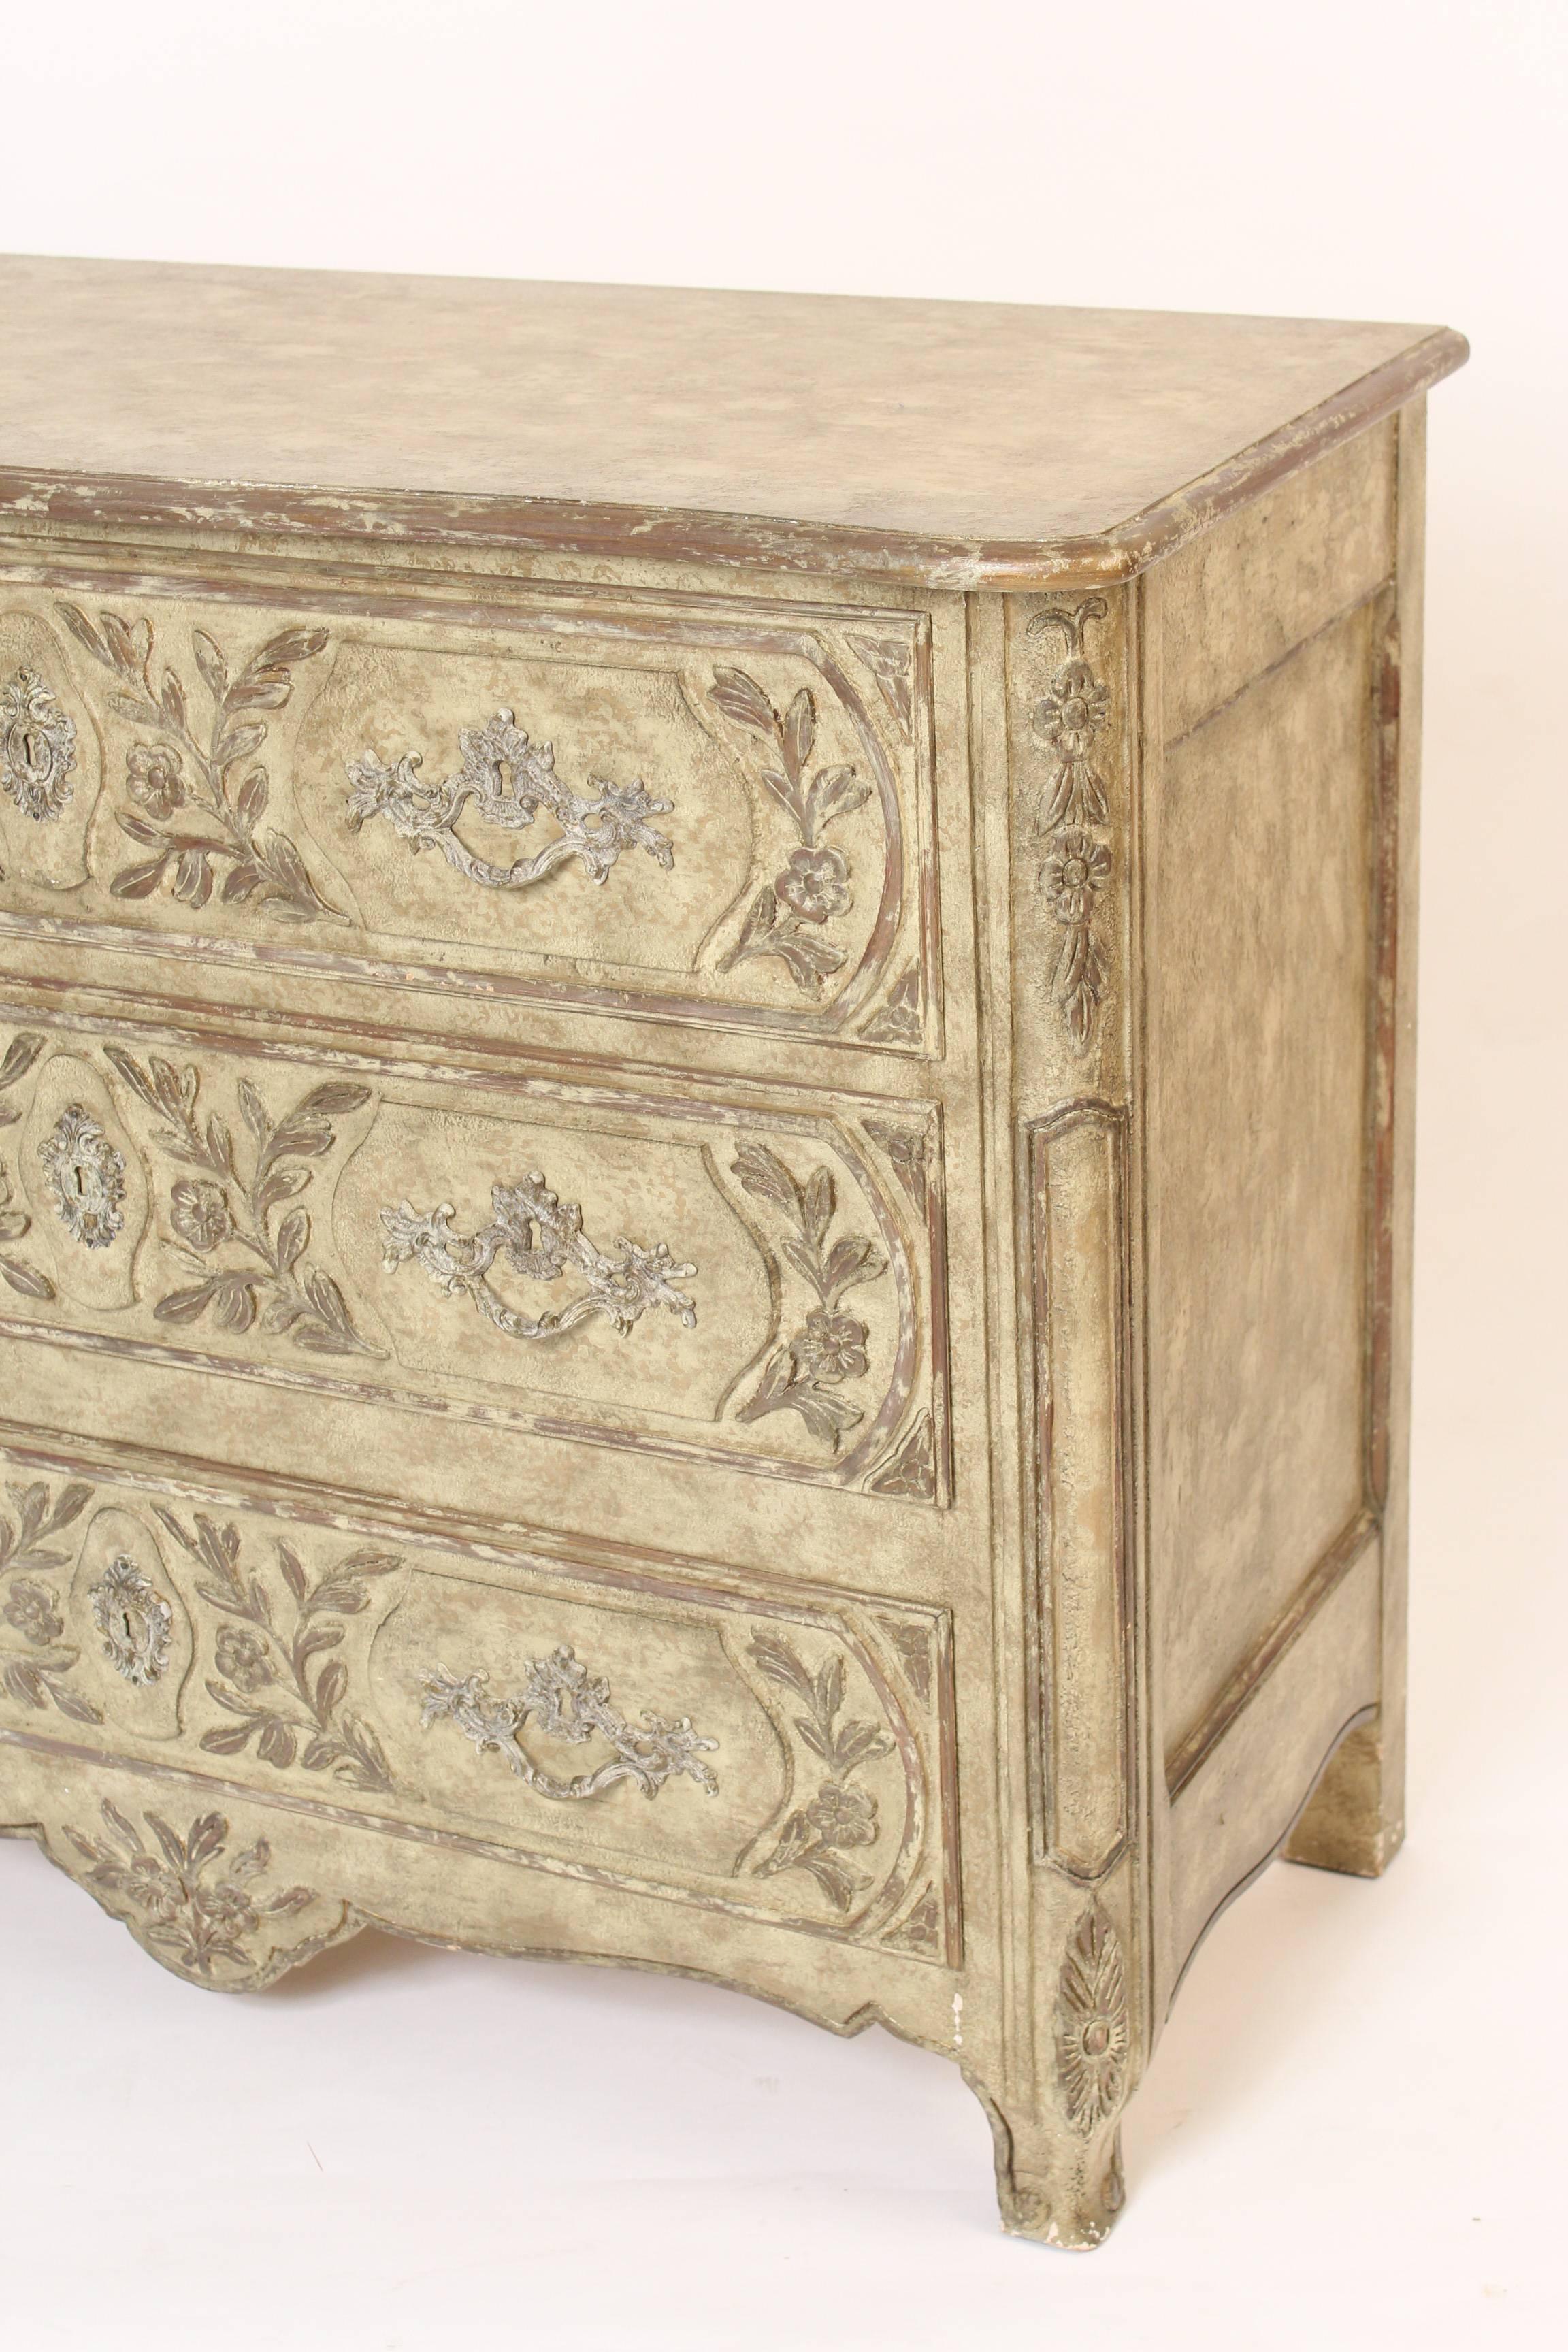 Louis provincial painted commode , made by Baker, late 20th century. Features on this commode include, a serpentine shaped top, nice crusty painted surfaces, carved raised floral decoration on the drawers and  Louis XV style brass hardware.